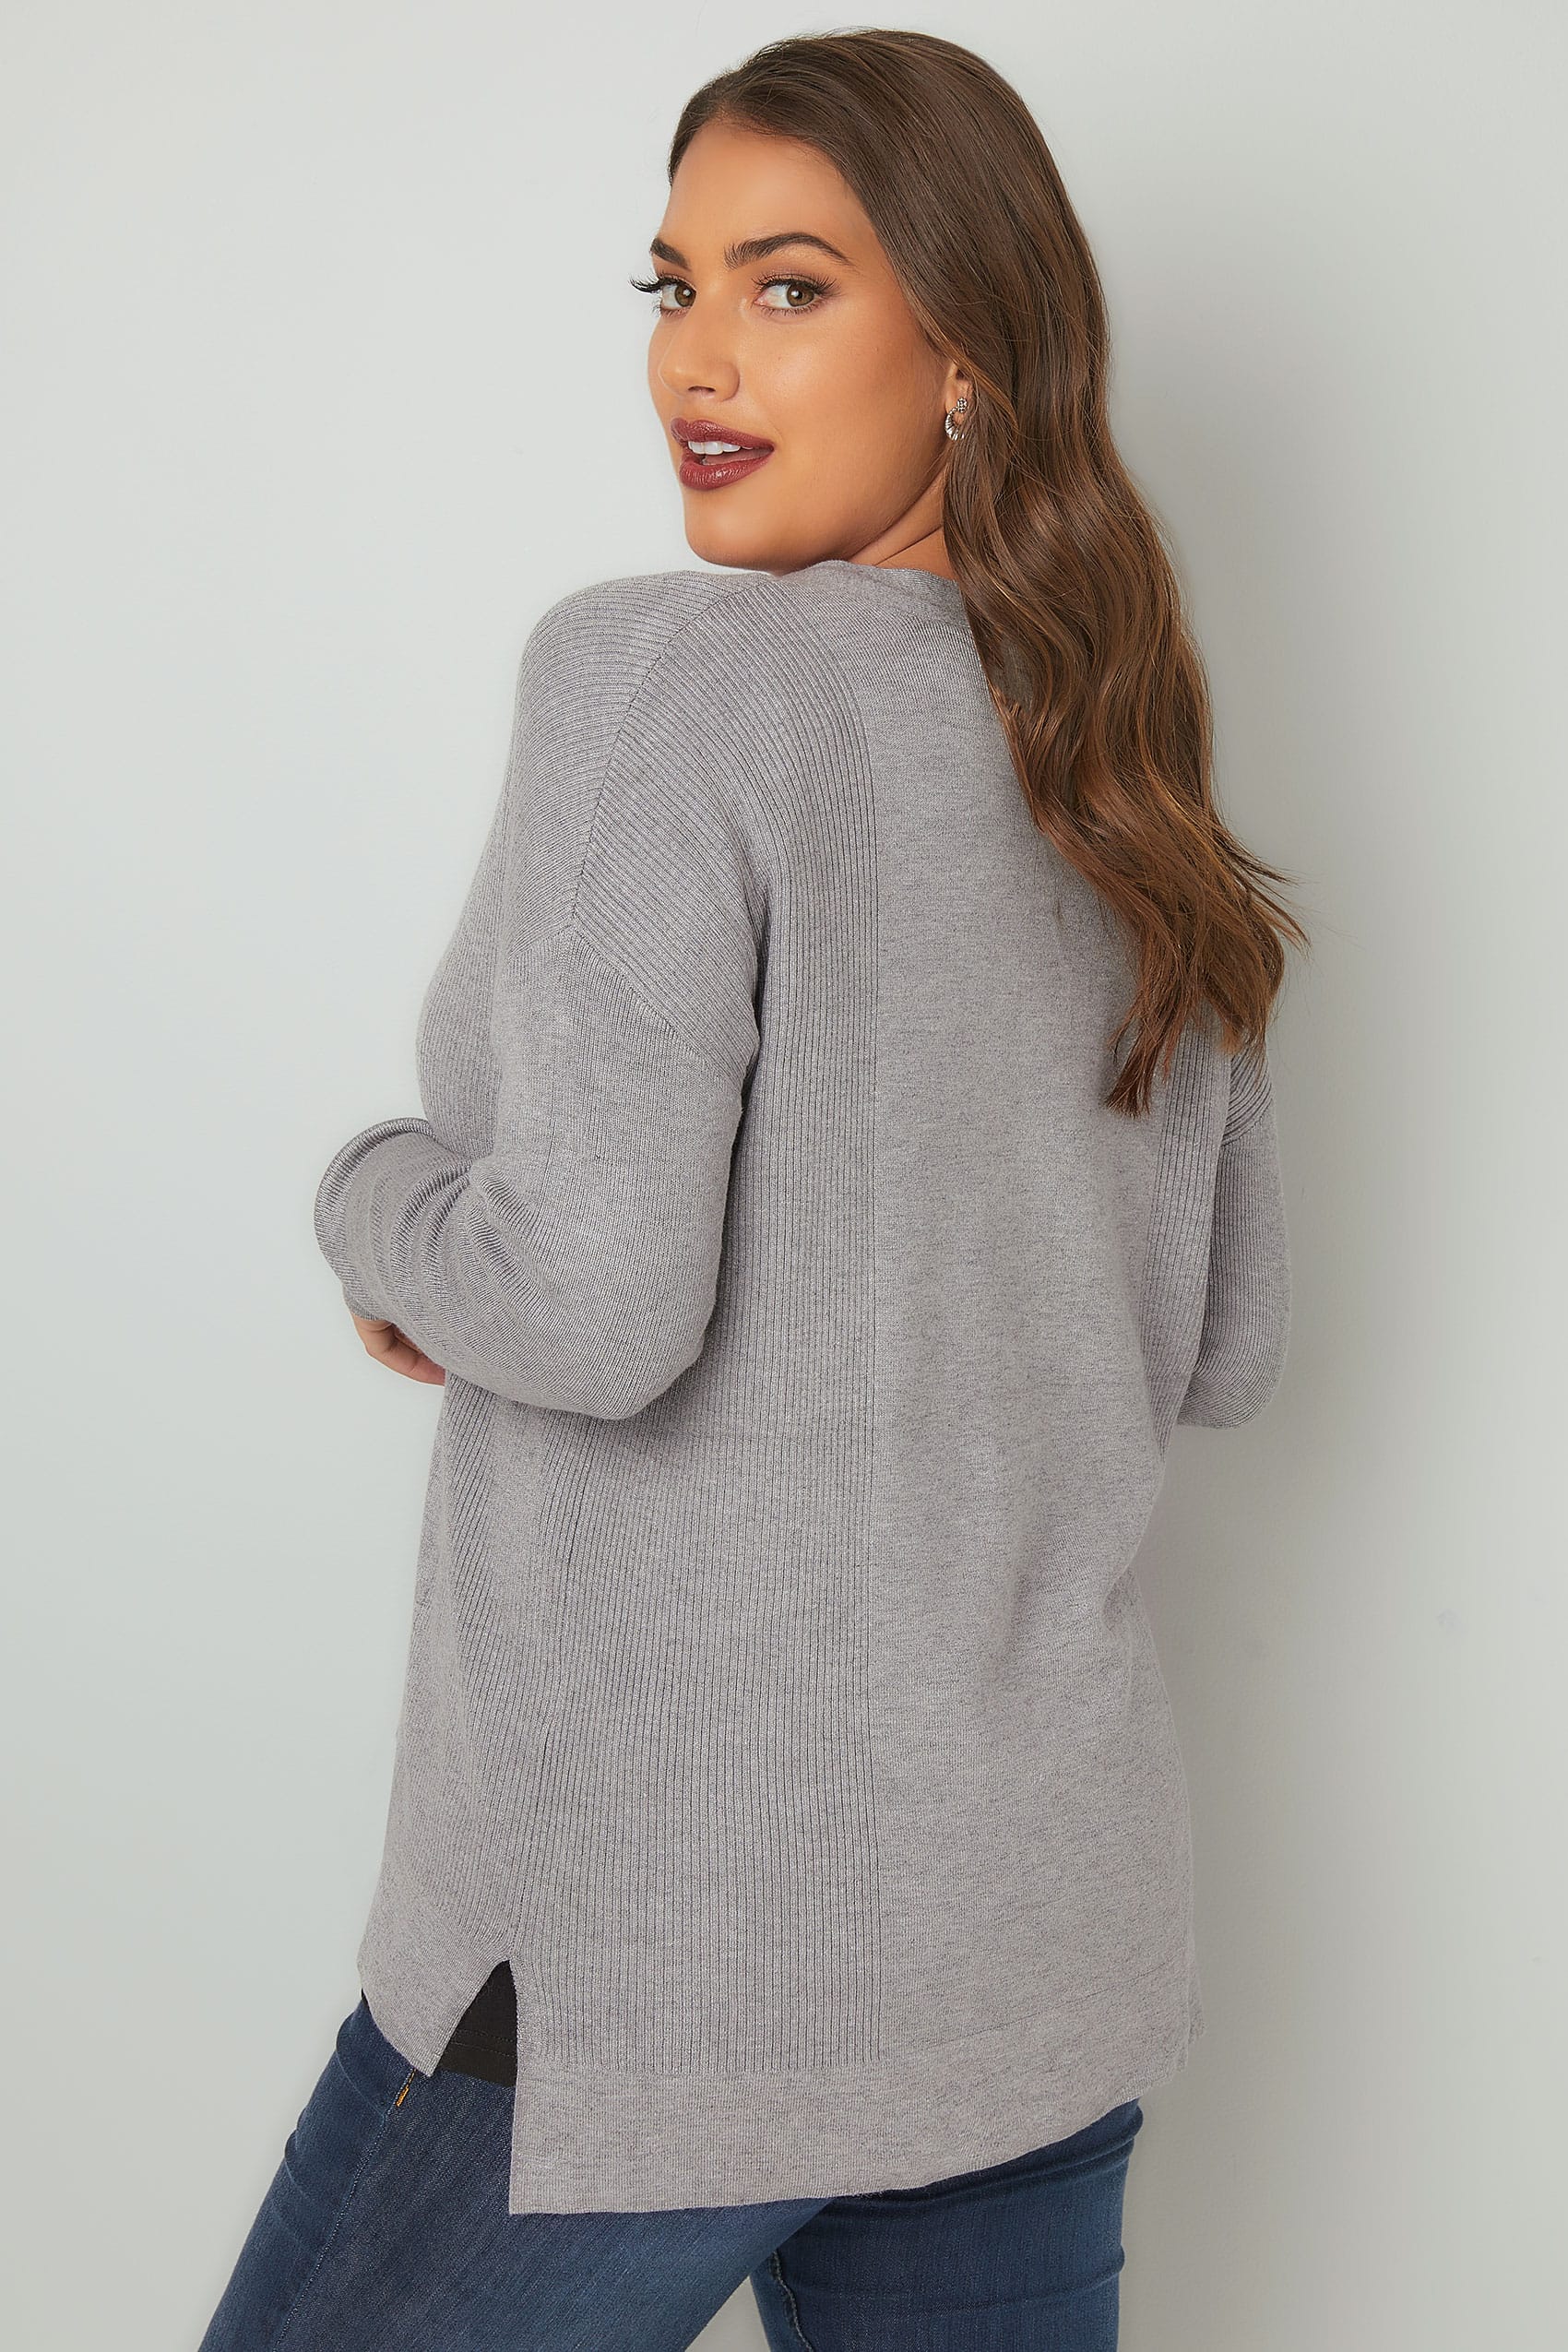 Grey Cardigan With Zip Front, Plus size 16 to 36